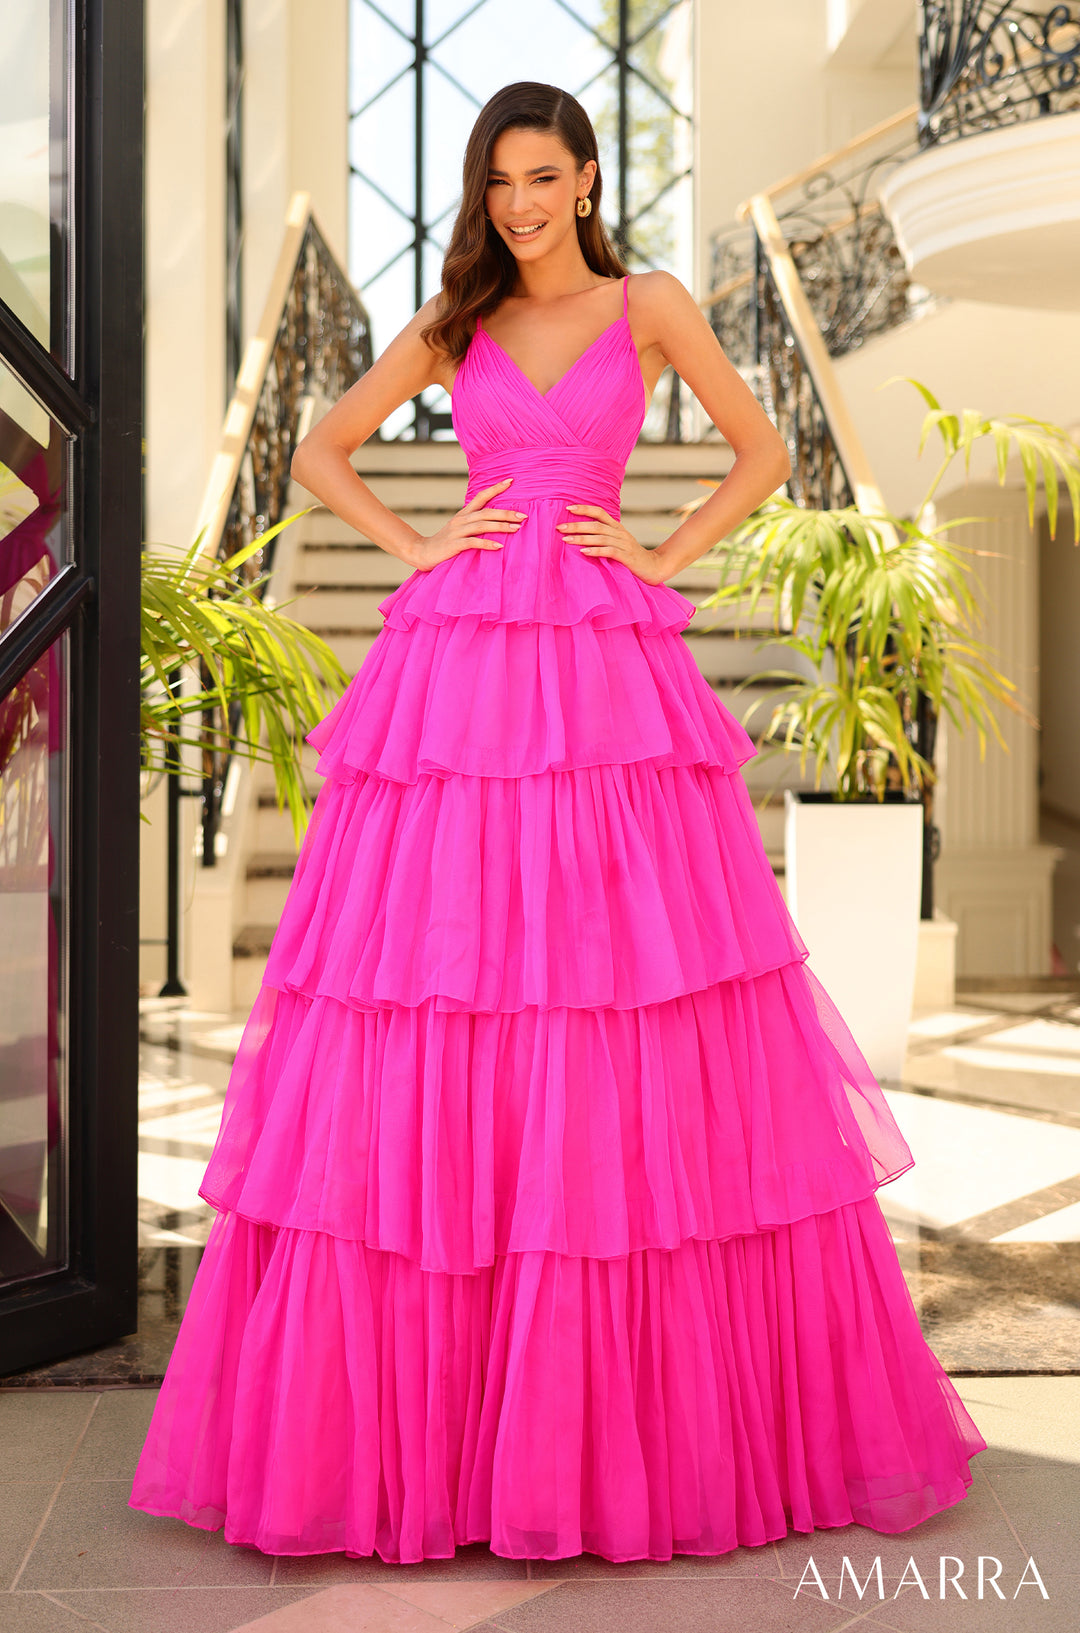 Sleeveless V-Neck A-line Tiered Gown by Amarra 88878